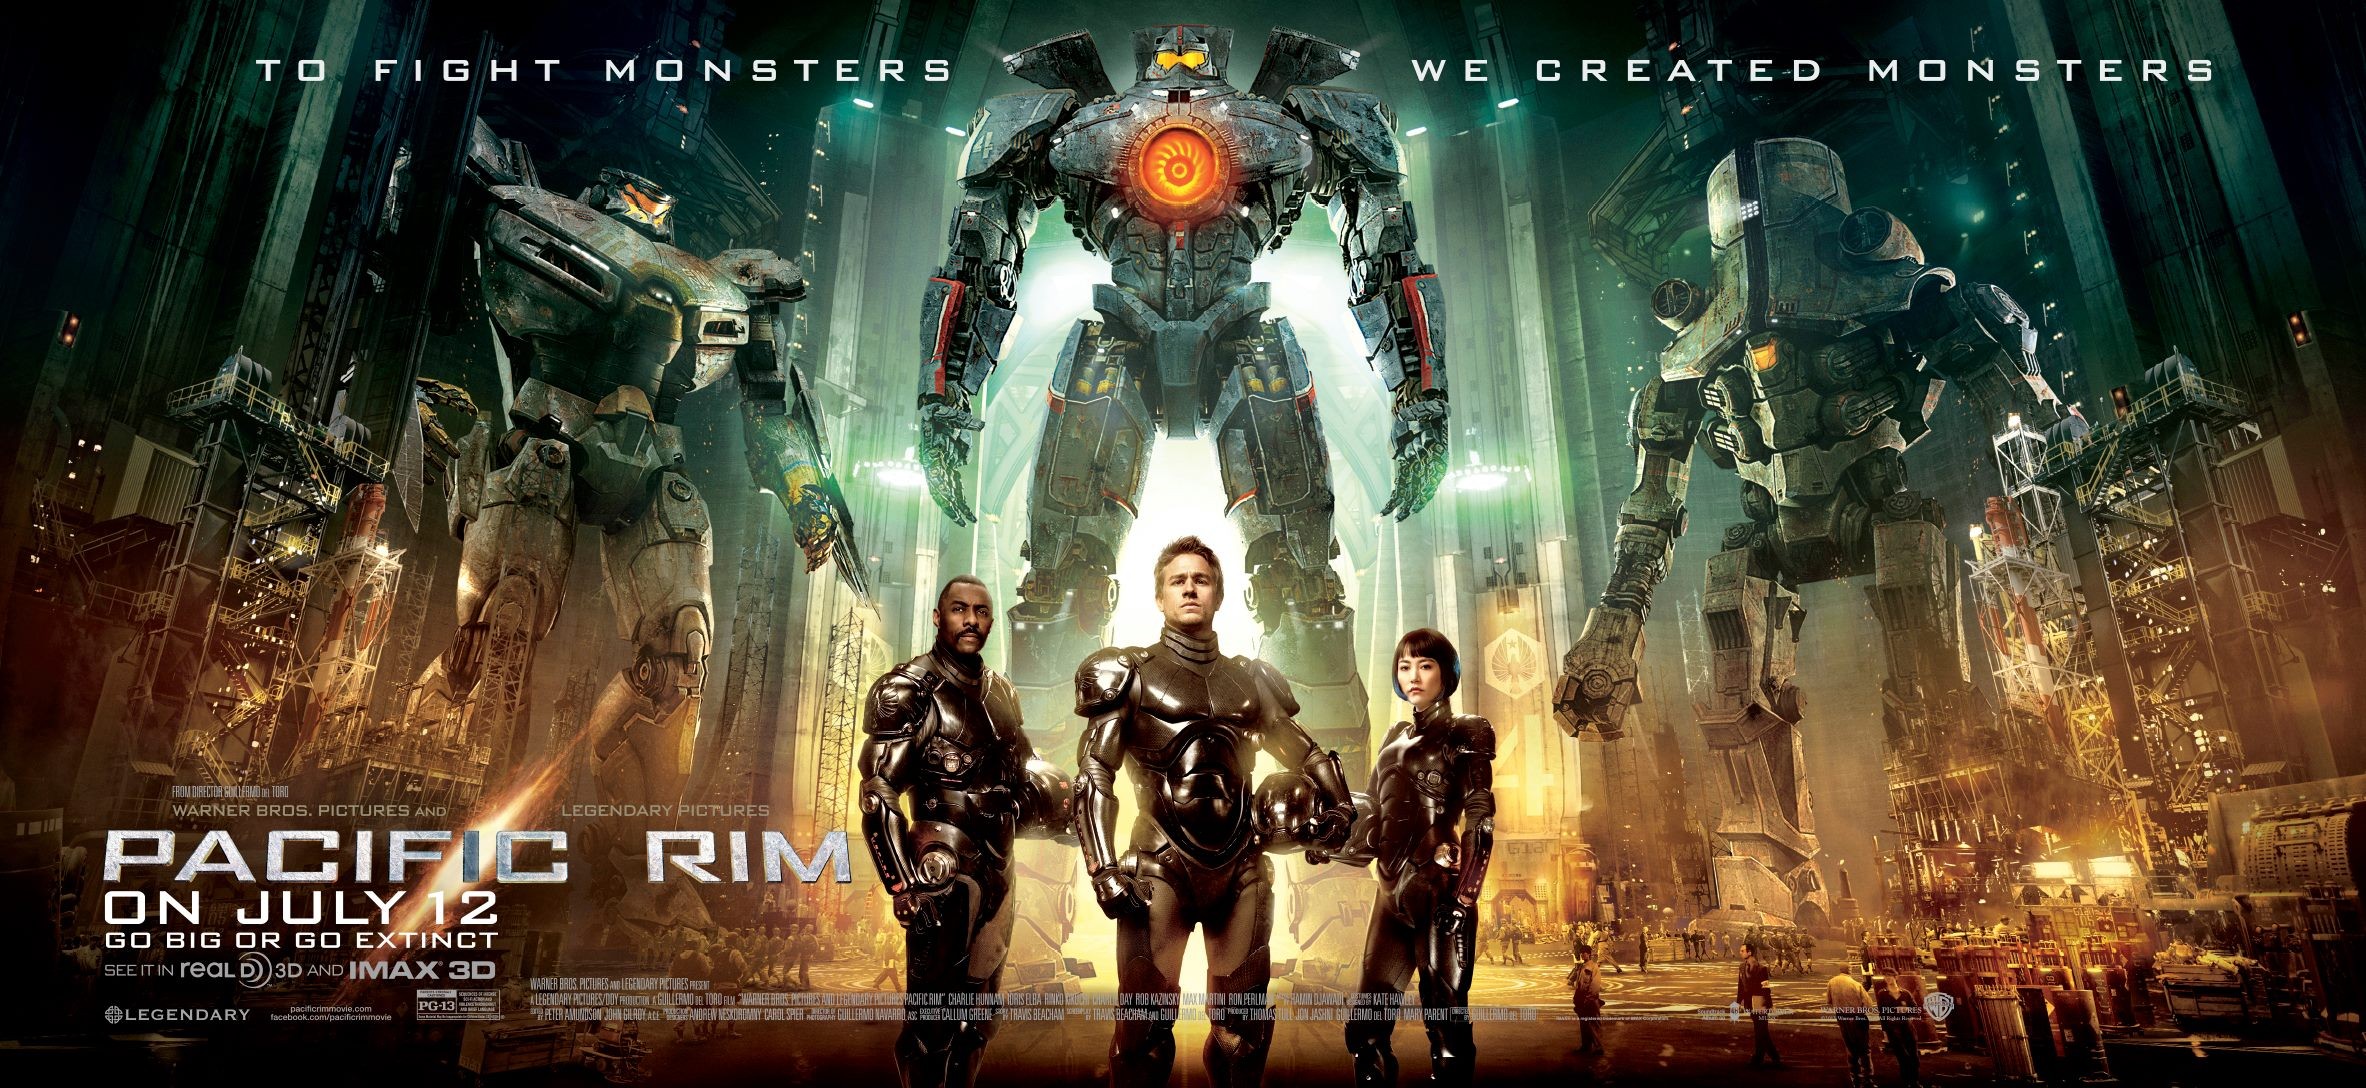 Mega Sized Movie Poster Image for Pacific Rim (#15 of 26)